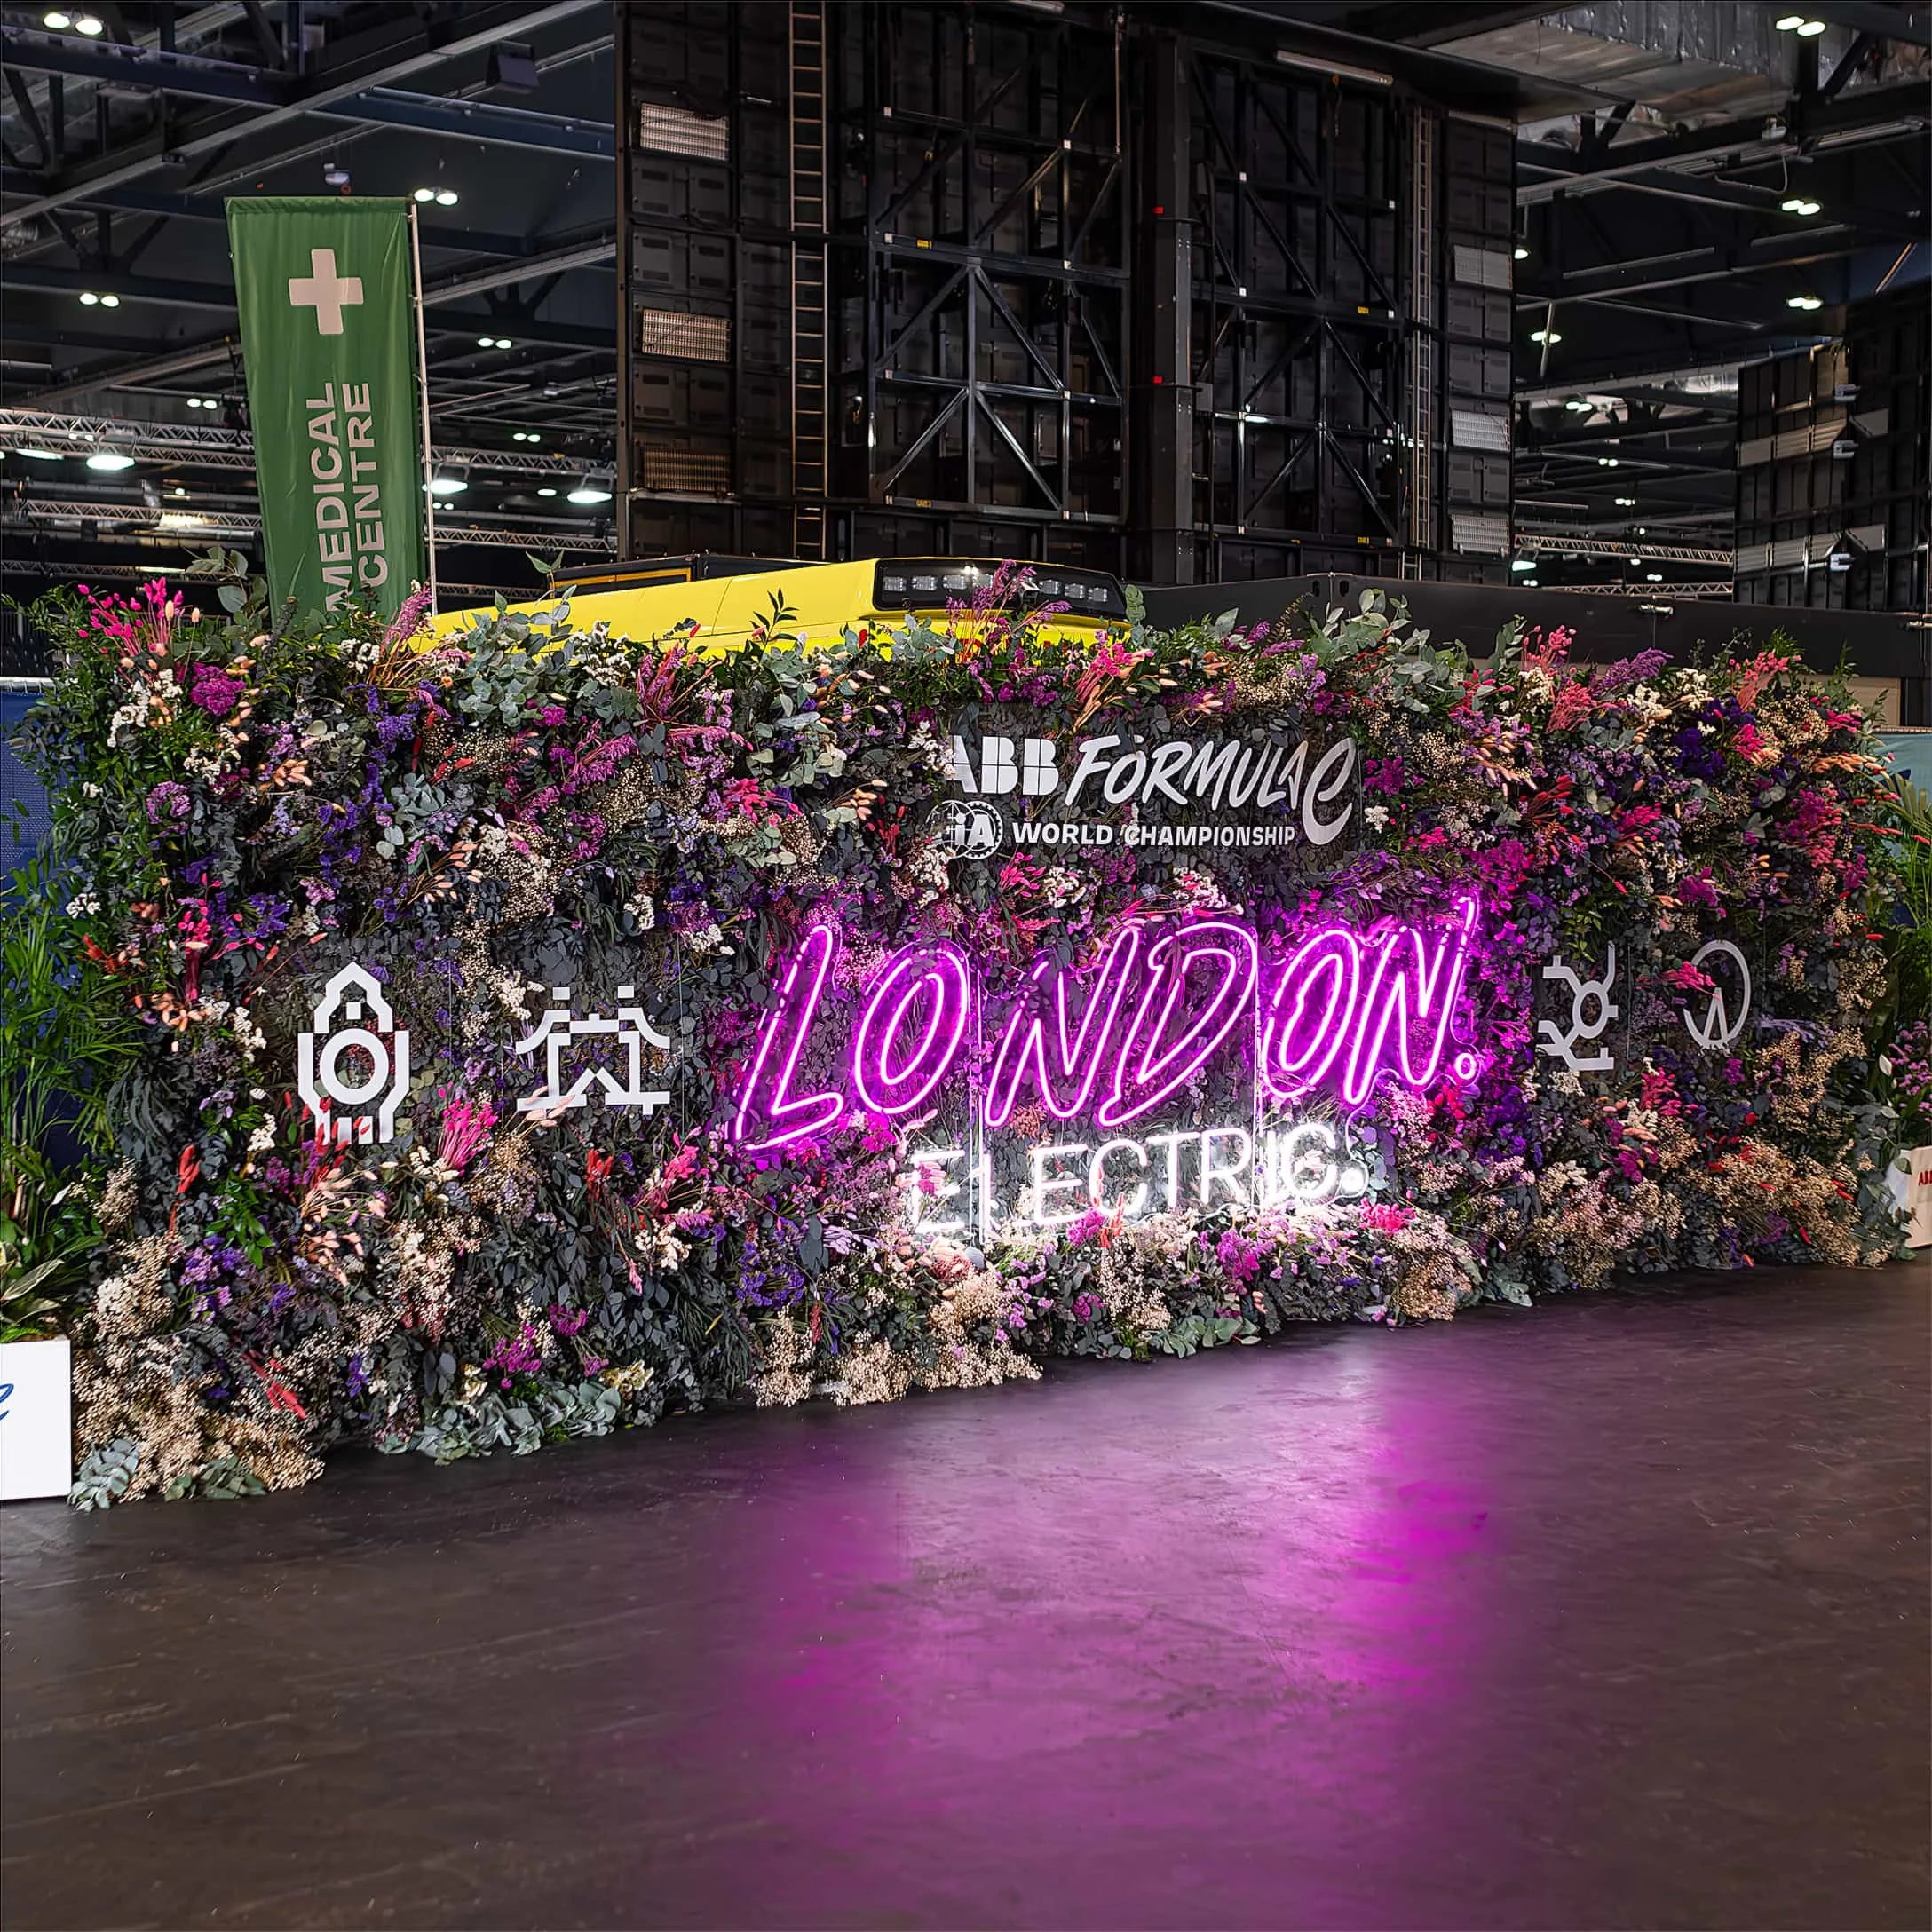 This is a broad view of a floral and plant wall at the Formula E World Championship in London. Our even florists designed this bespoke and extensive floral arrangement with a blend of vibrant flowers and bespoke signage set against a tech-savvy backdrop.